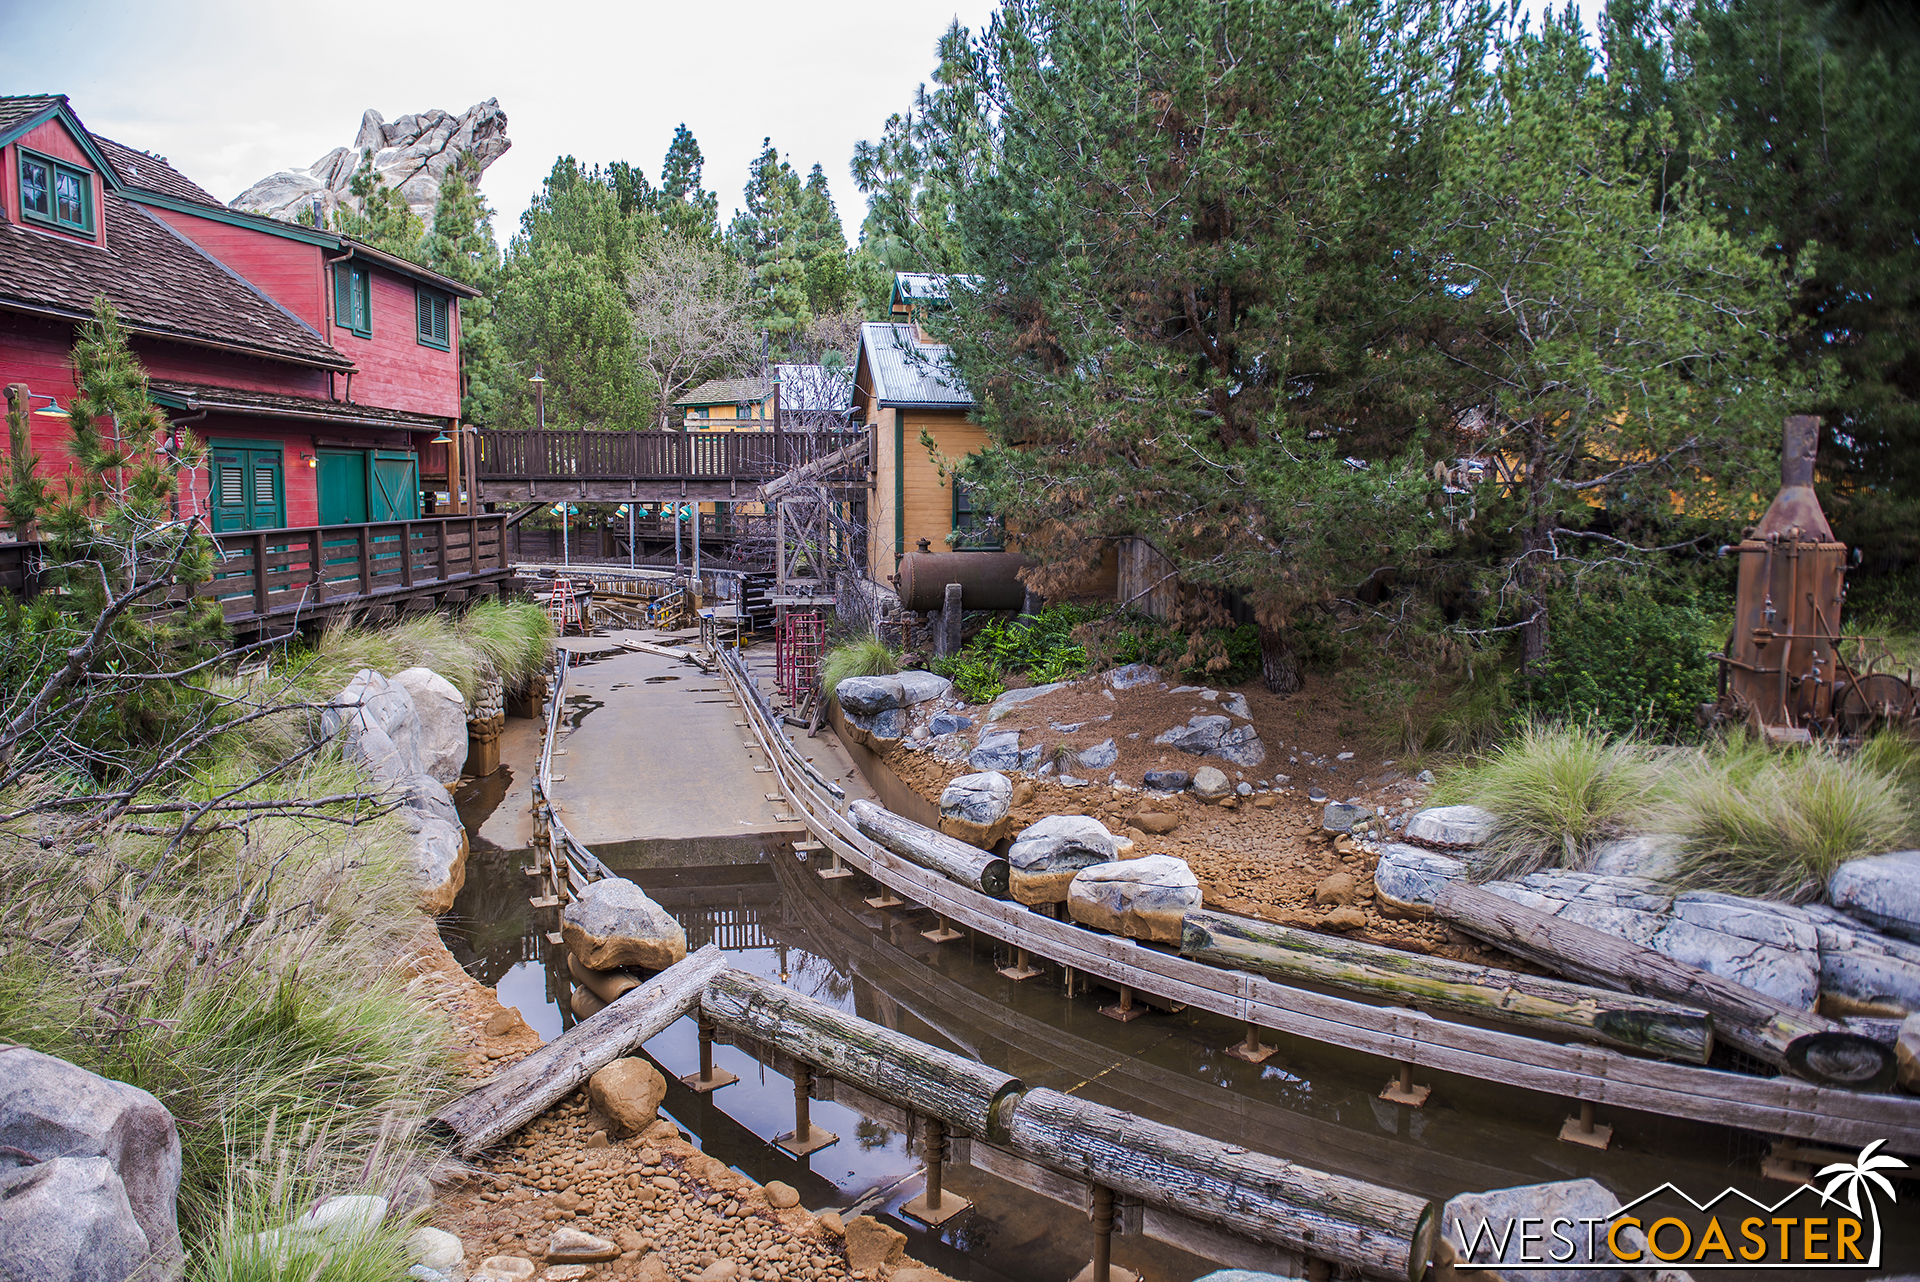  Grizzly River Run is still closed and dry.&nbsp; I half expected it to be swollen from Friday's "Pacific Storm Lucifer" precipitation. 